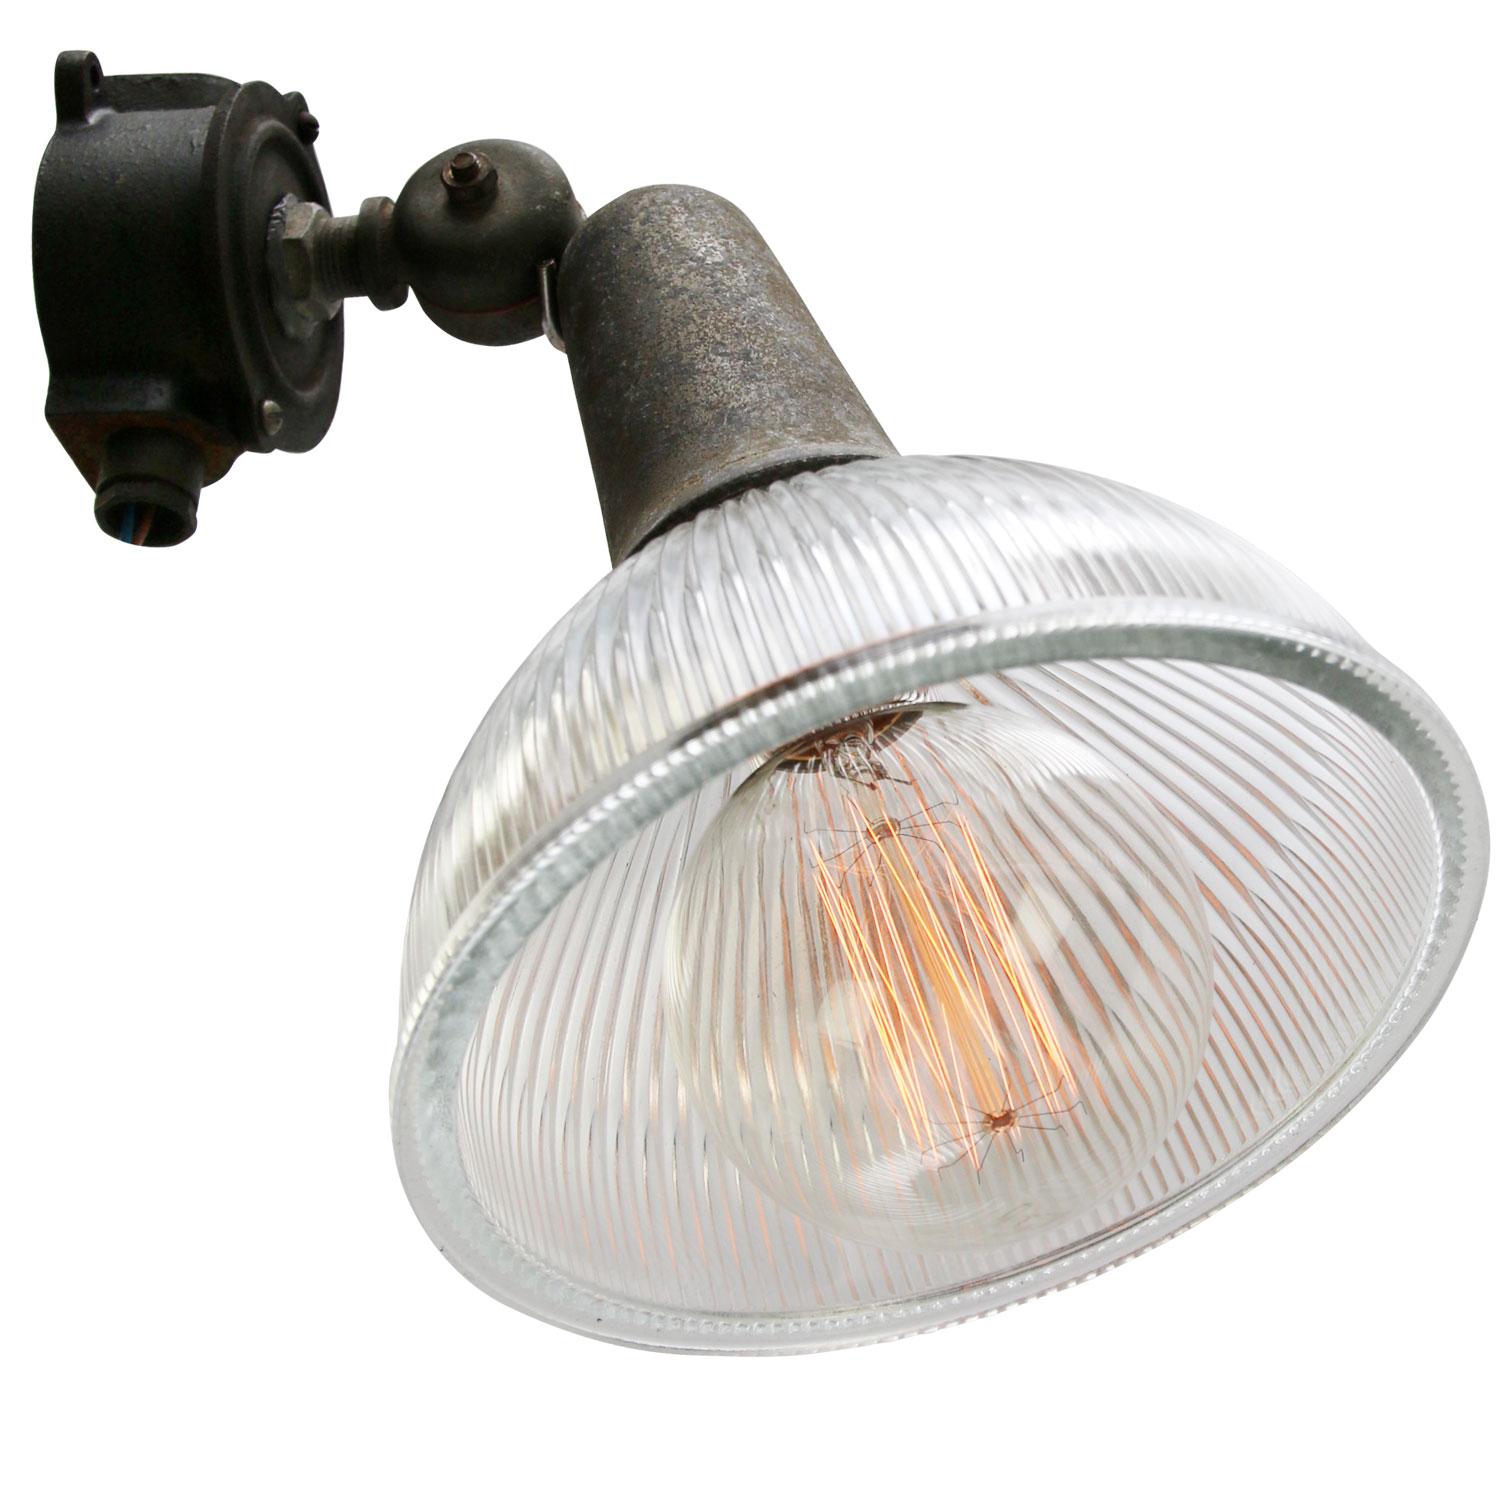 industrial wall lamp / scone
Clear striped Holophane glass shade.
Cast iron wall mount with cast aluminum neck

Weight: 1.40 kg / 3.1 lb

Priced per individual item. All lamps have been made suitable by international standards for incandescent